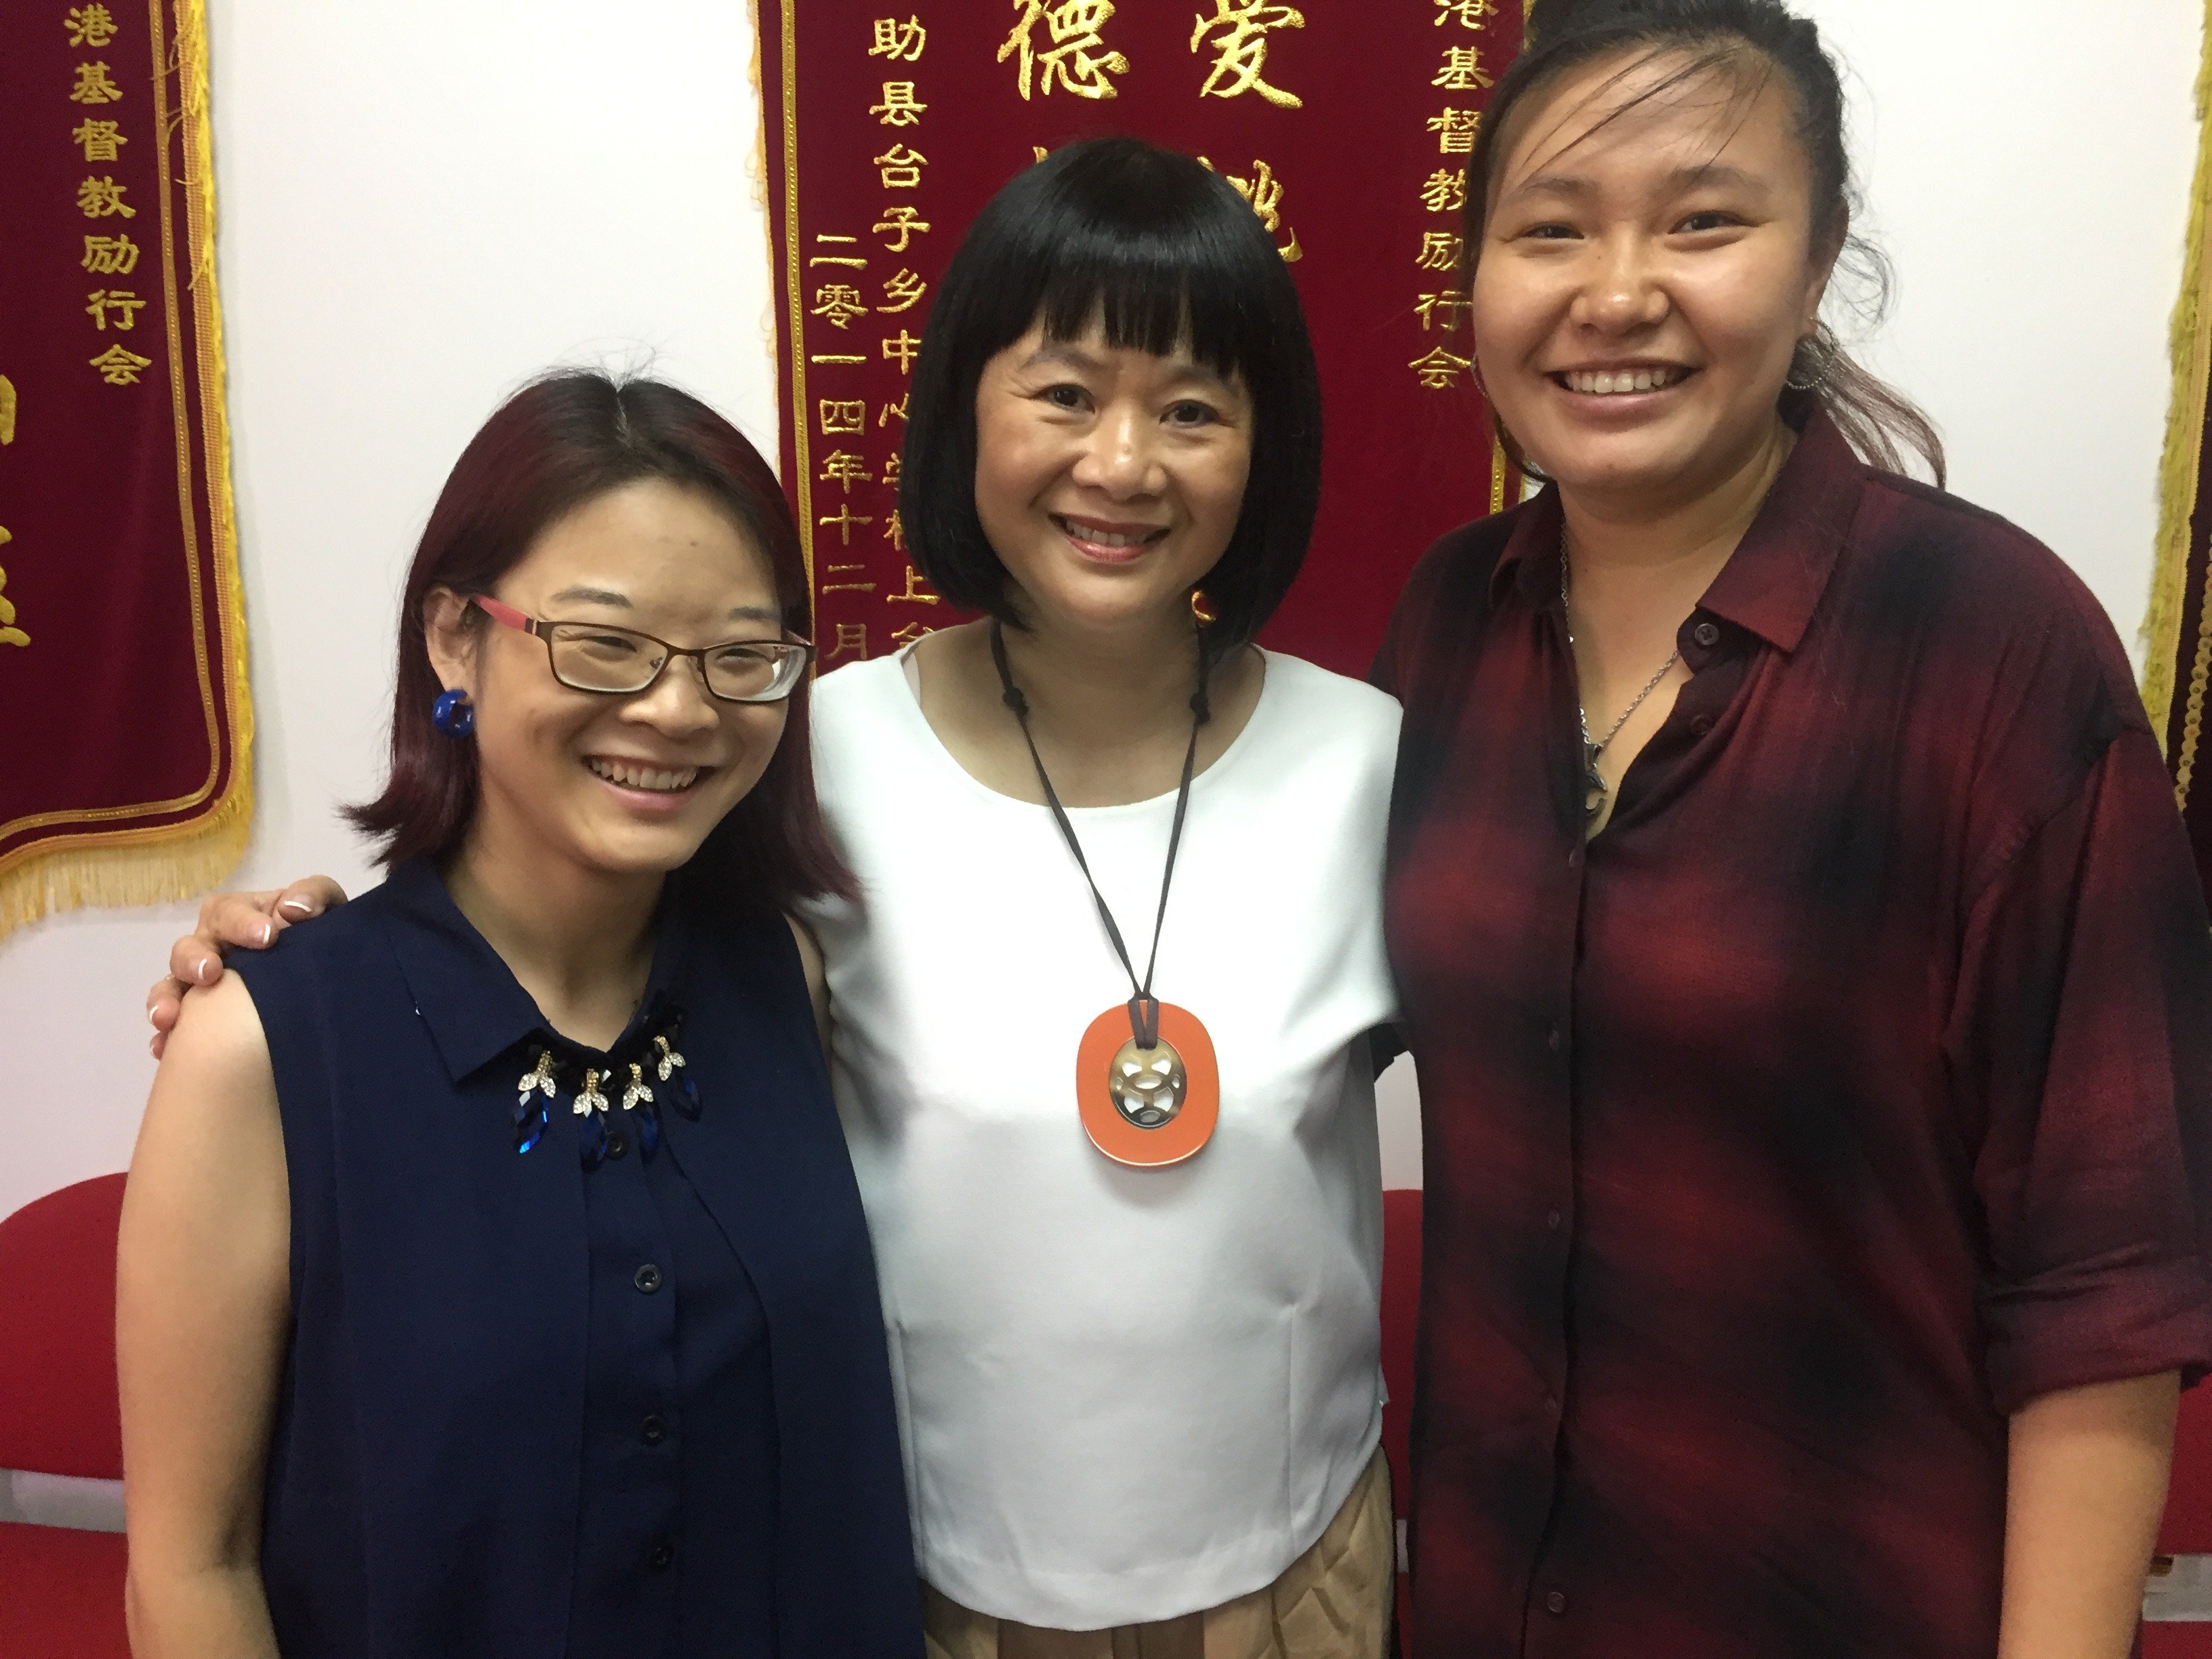 From left: Abigail Anderson, Christian Action executive director Cheung-Ang Siew Mei and Bingjie Turner.